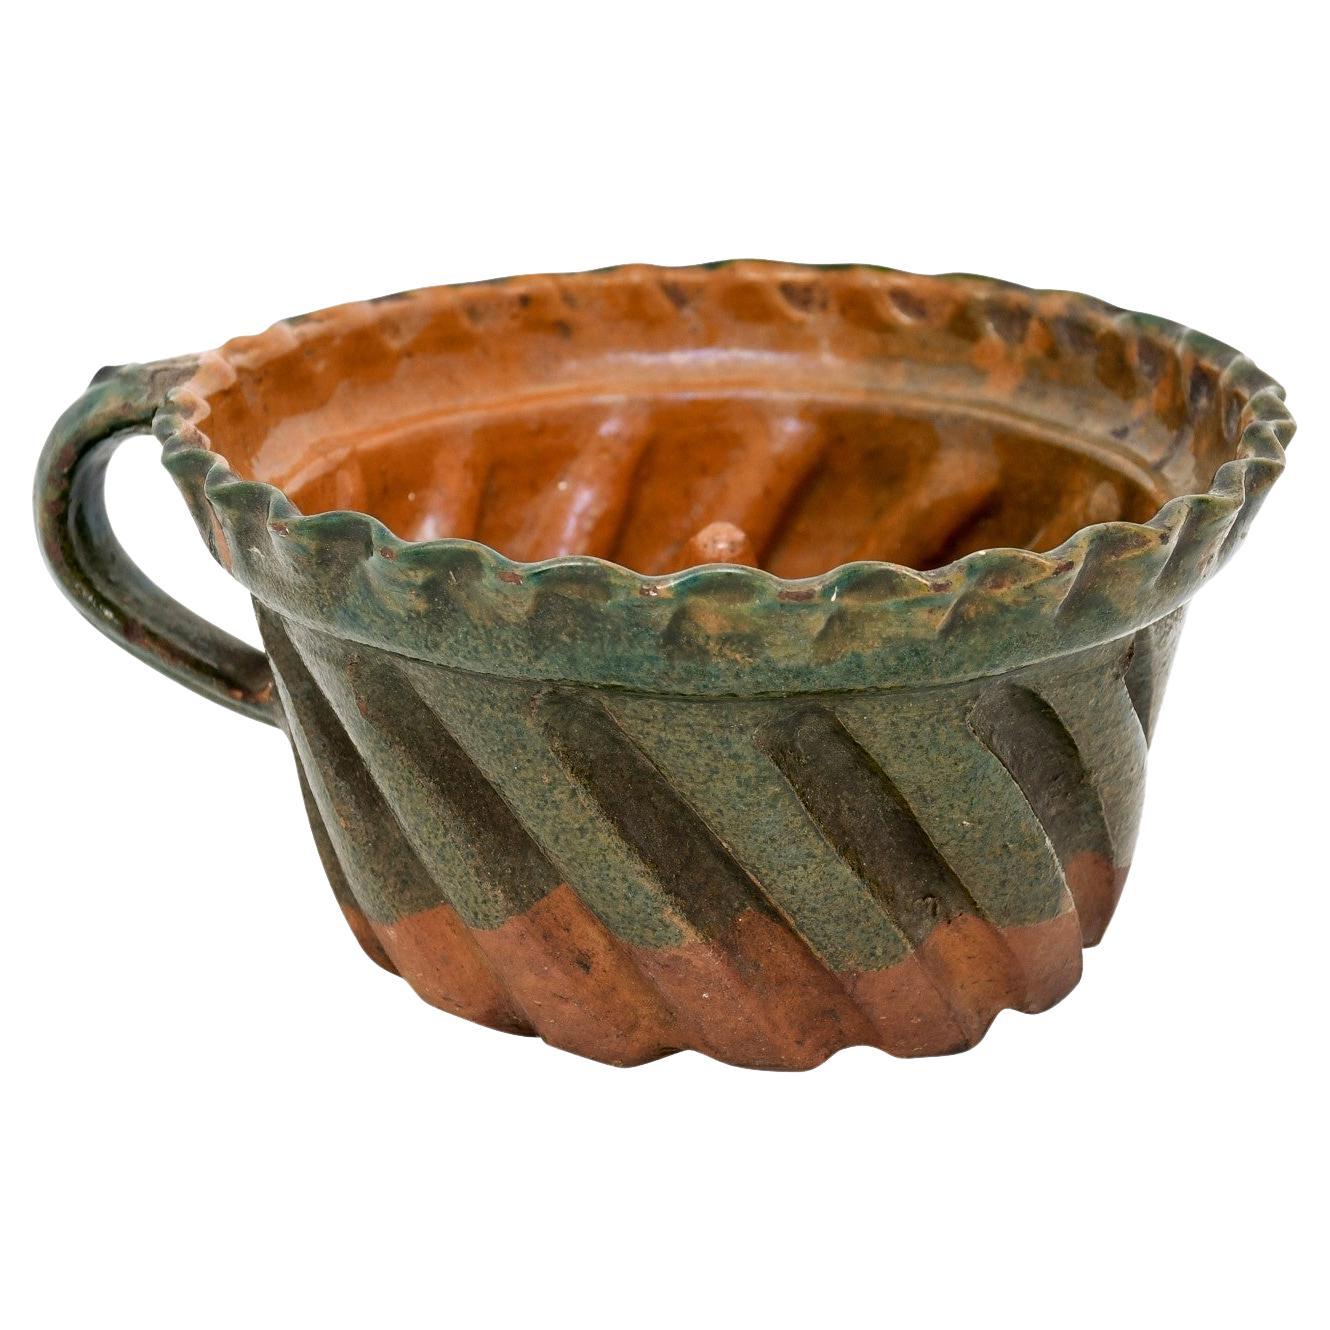 French 19th Century Green and Brown Glazed Pottery Cake Mold with Grooves